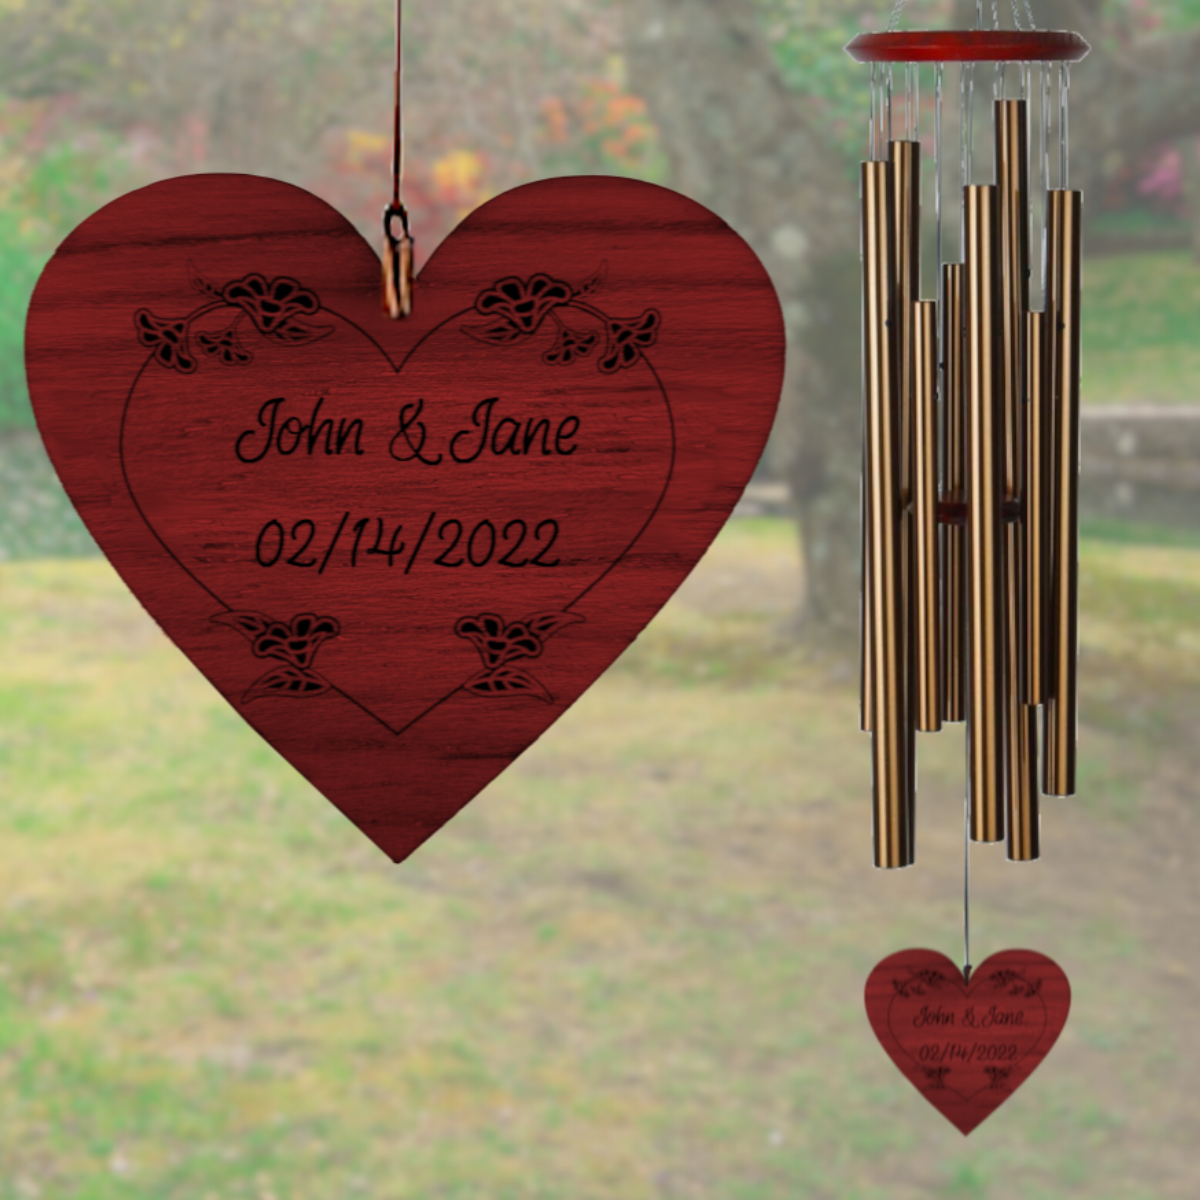 40 INCH CHIMES OF THE ECLIPSE WIND CHIME - BRONZE - BLOSSOM HEART SAIL